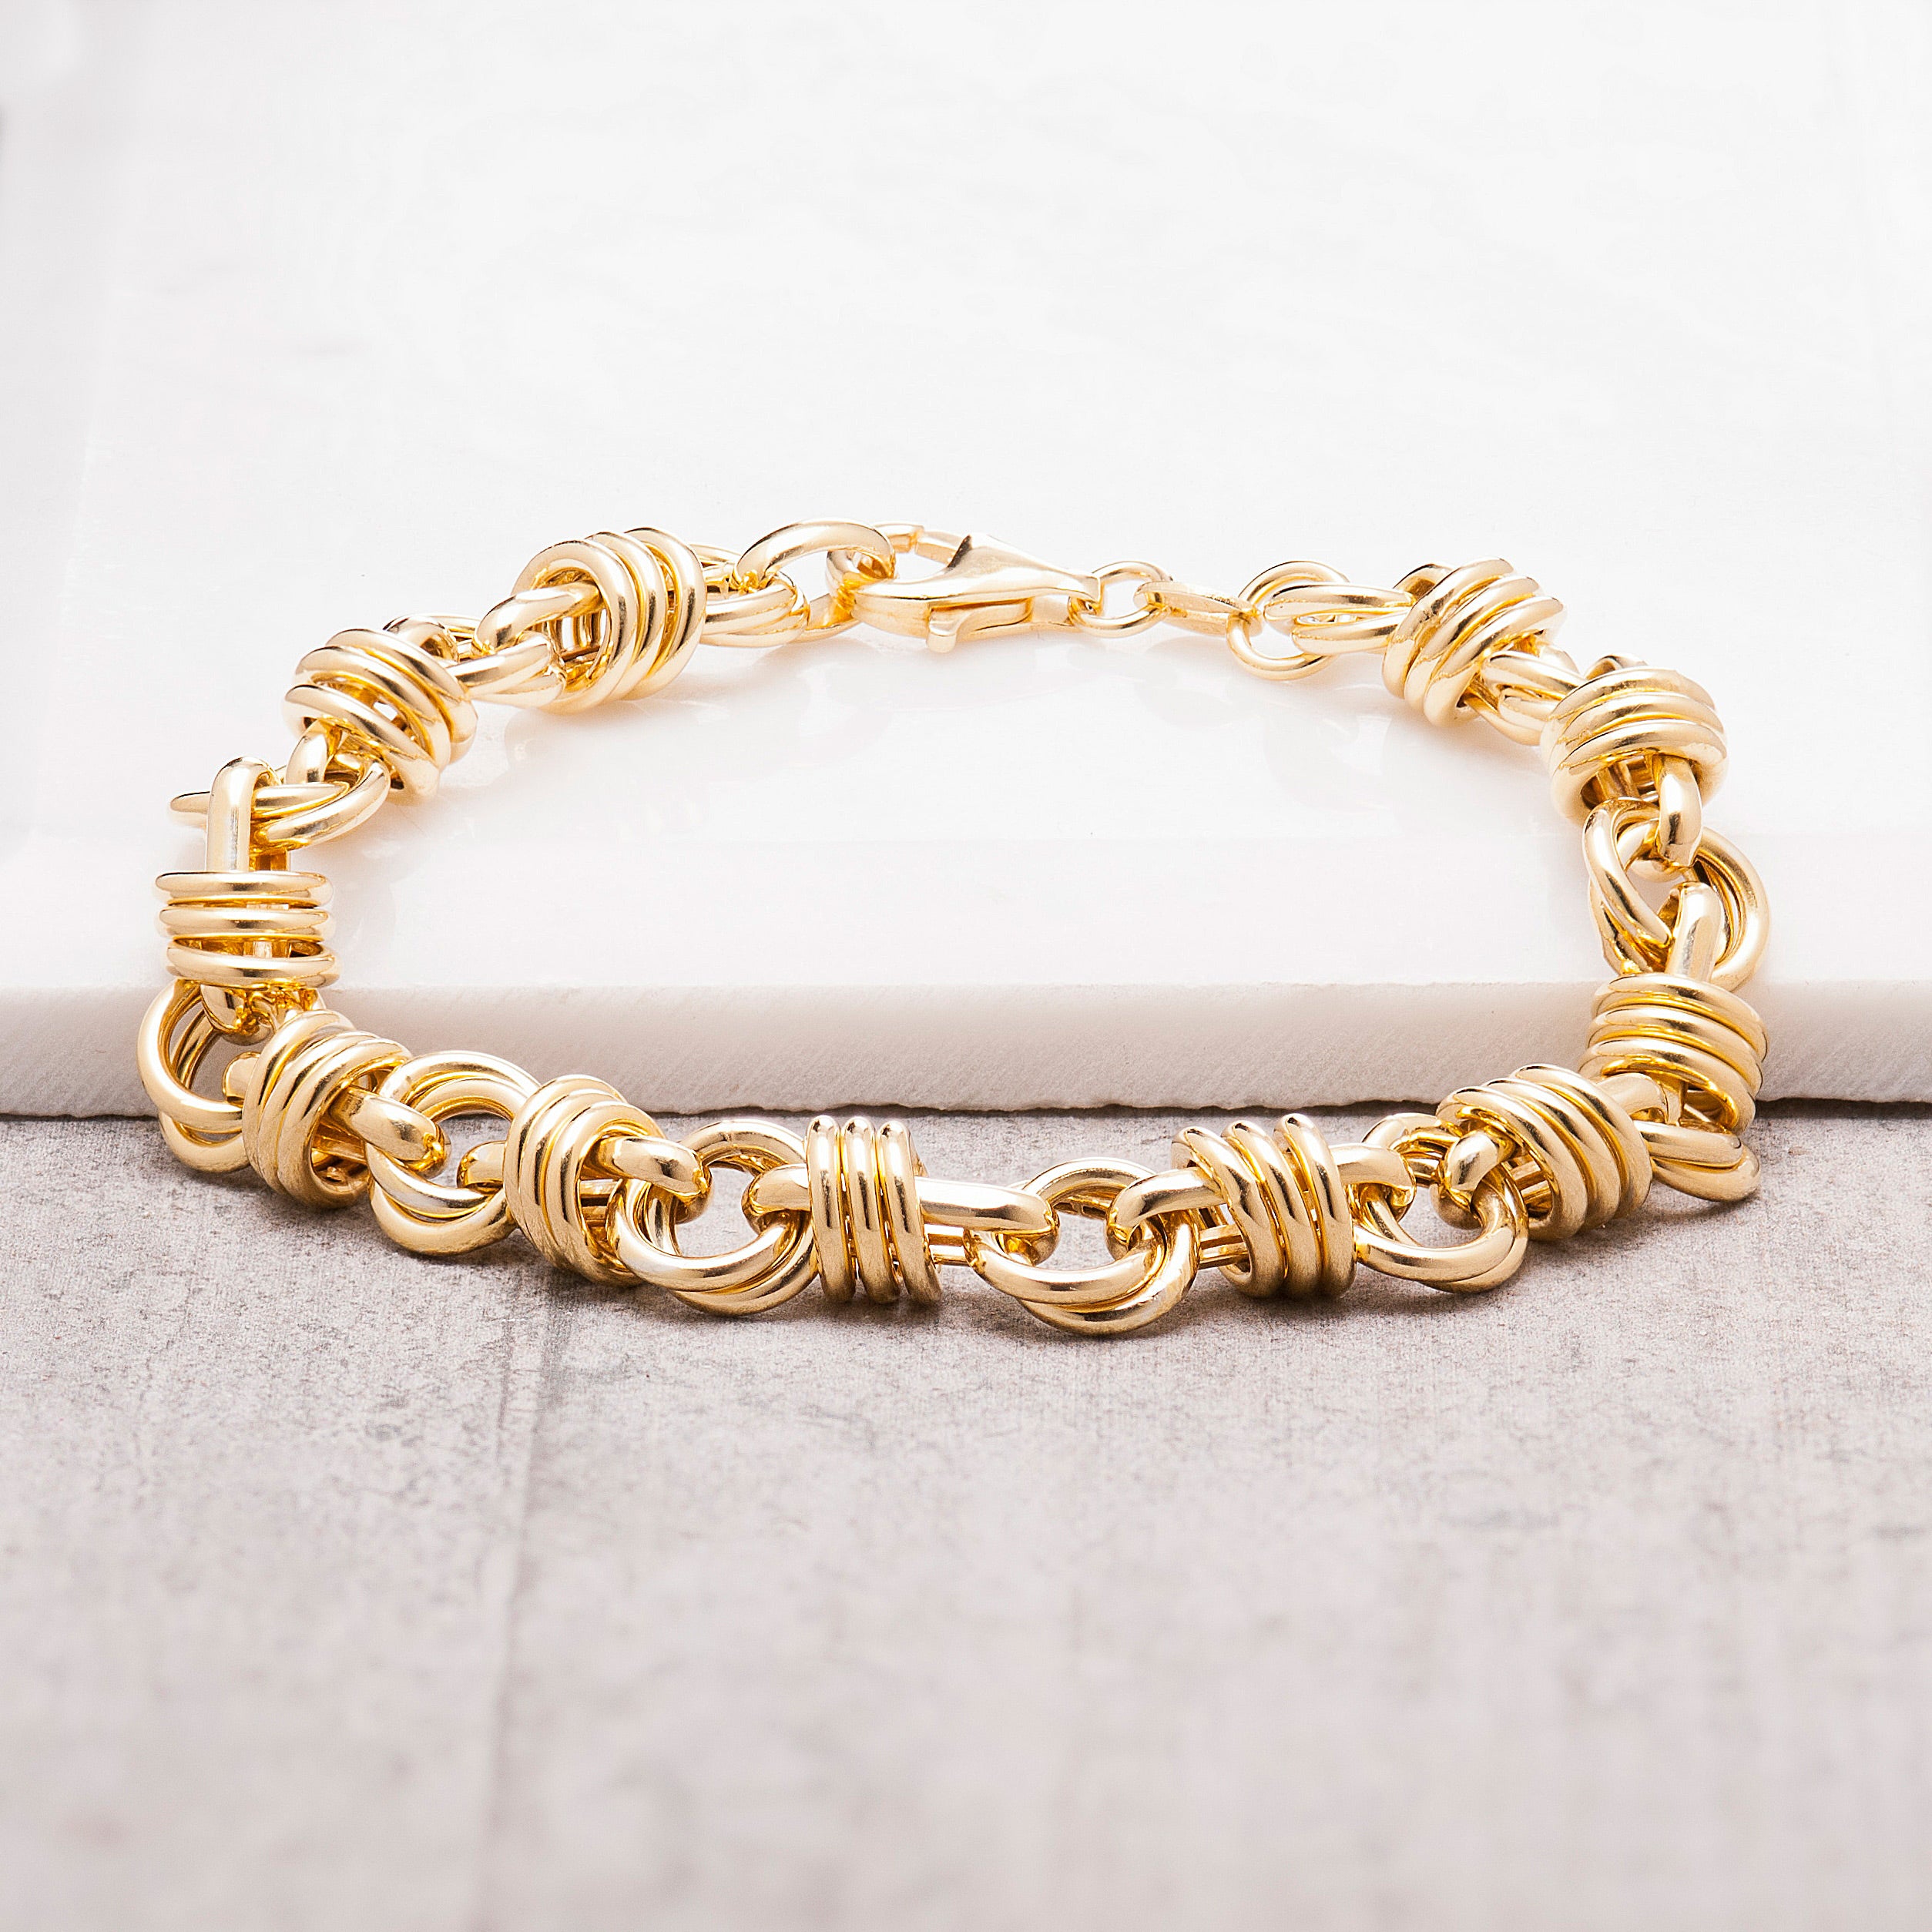 GOLD TWISTED CHAIN BRACELET